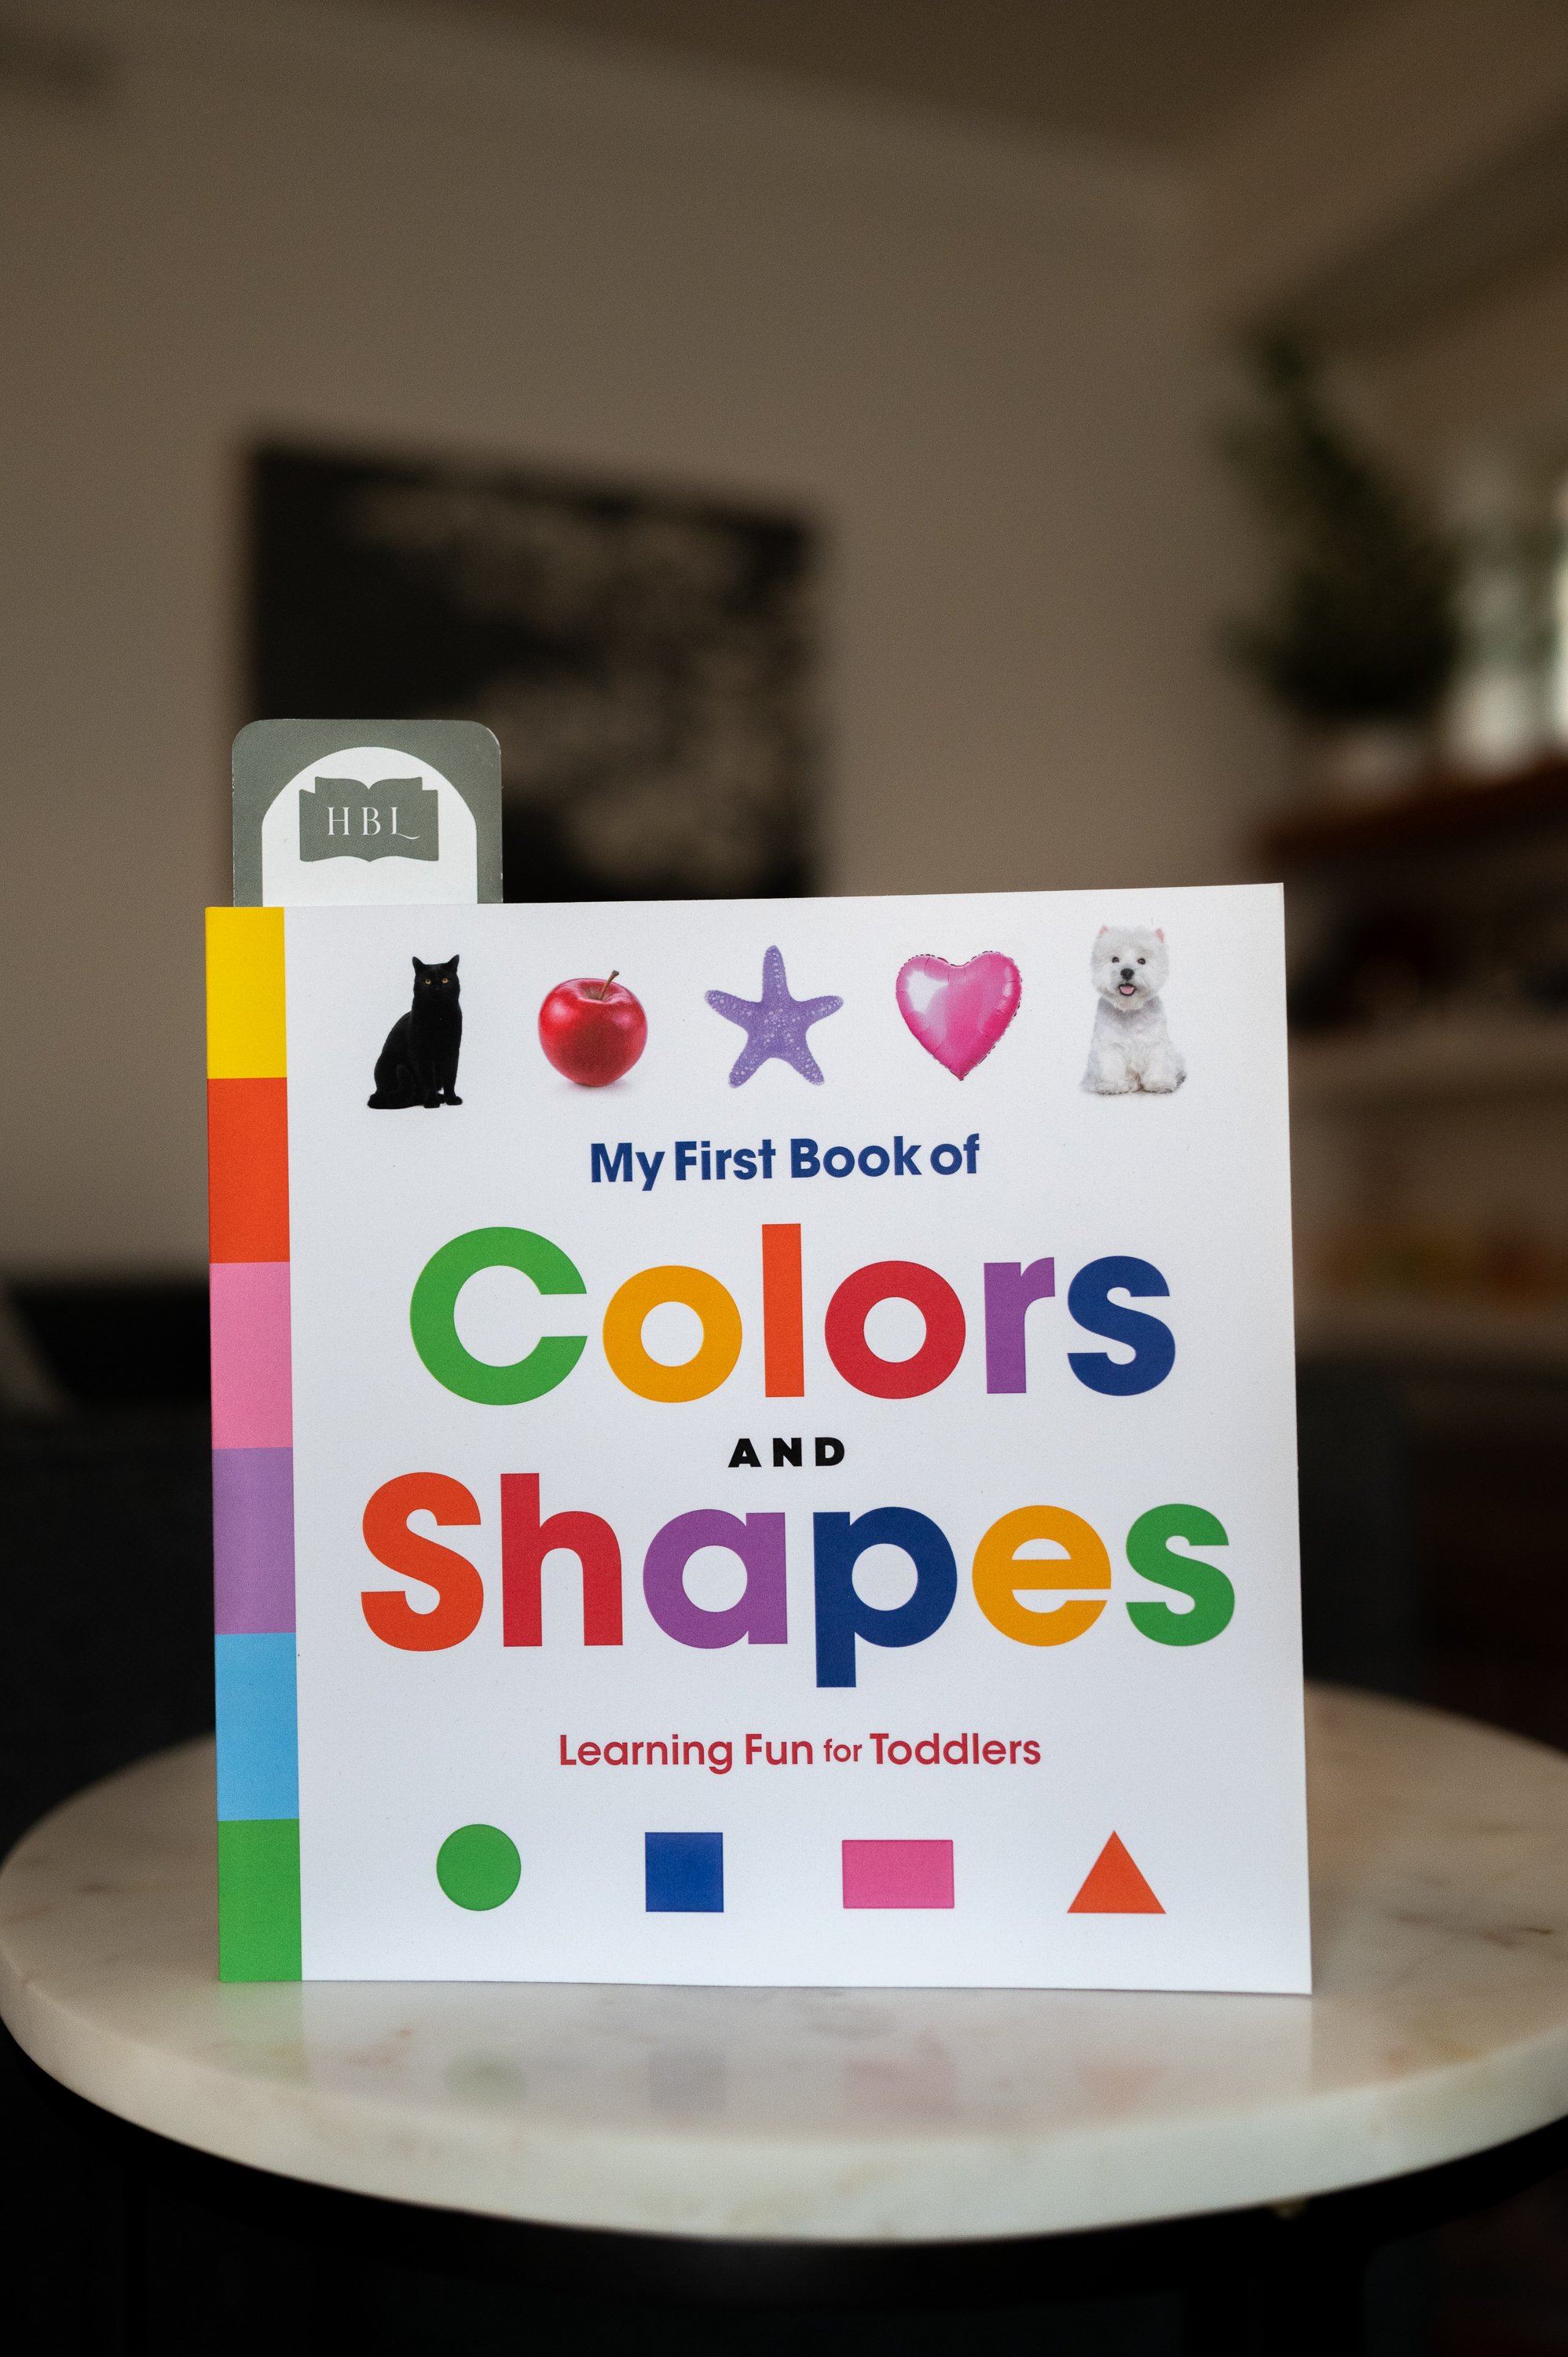 My First Book of Colors and Shapes.jpg